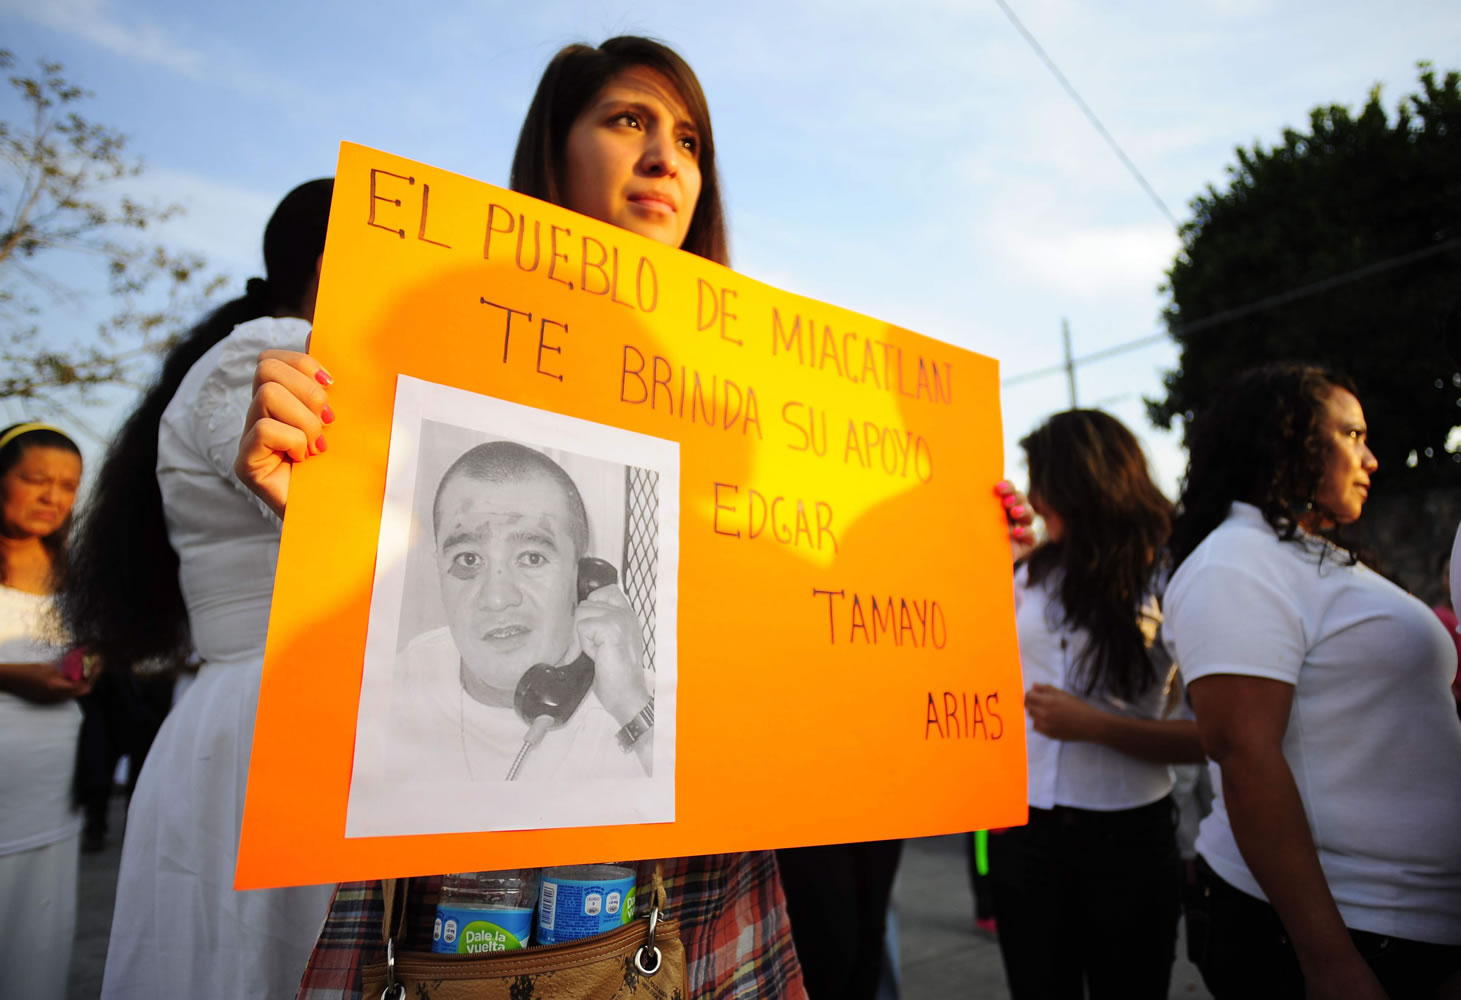 A woman holds up a sign showing a photo of Texas death-row inmate Edgar Tamayo that reads in Spanish &quot;The town of Miacatlan offers you our support, Edgar Tamayo Arias&quot; during a protest demanding Tamayo's pardon in his hometown of Miacatlan, Mexico, on Sunday.